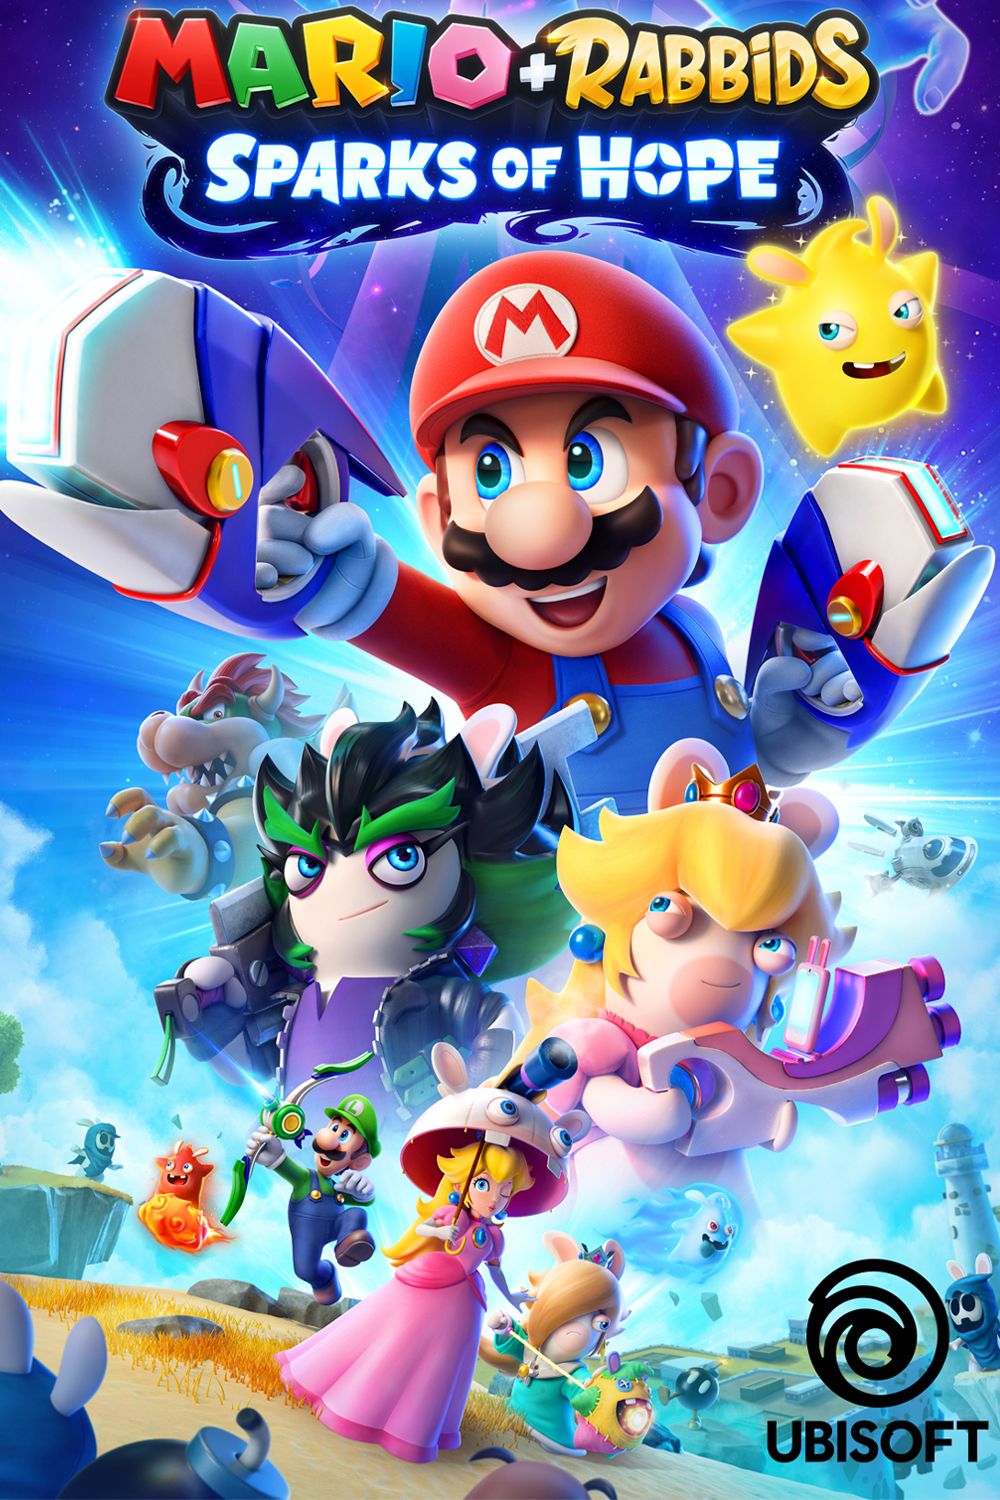 Mario + Rabbids Sparks of Hope (Limited Galactic Edition Deluxe